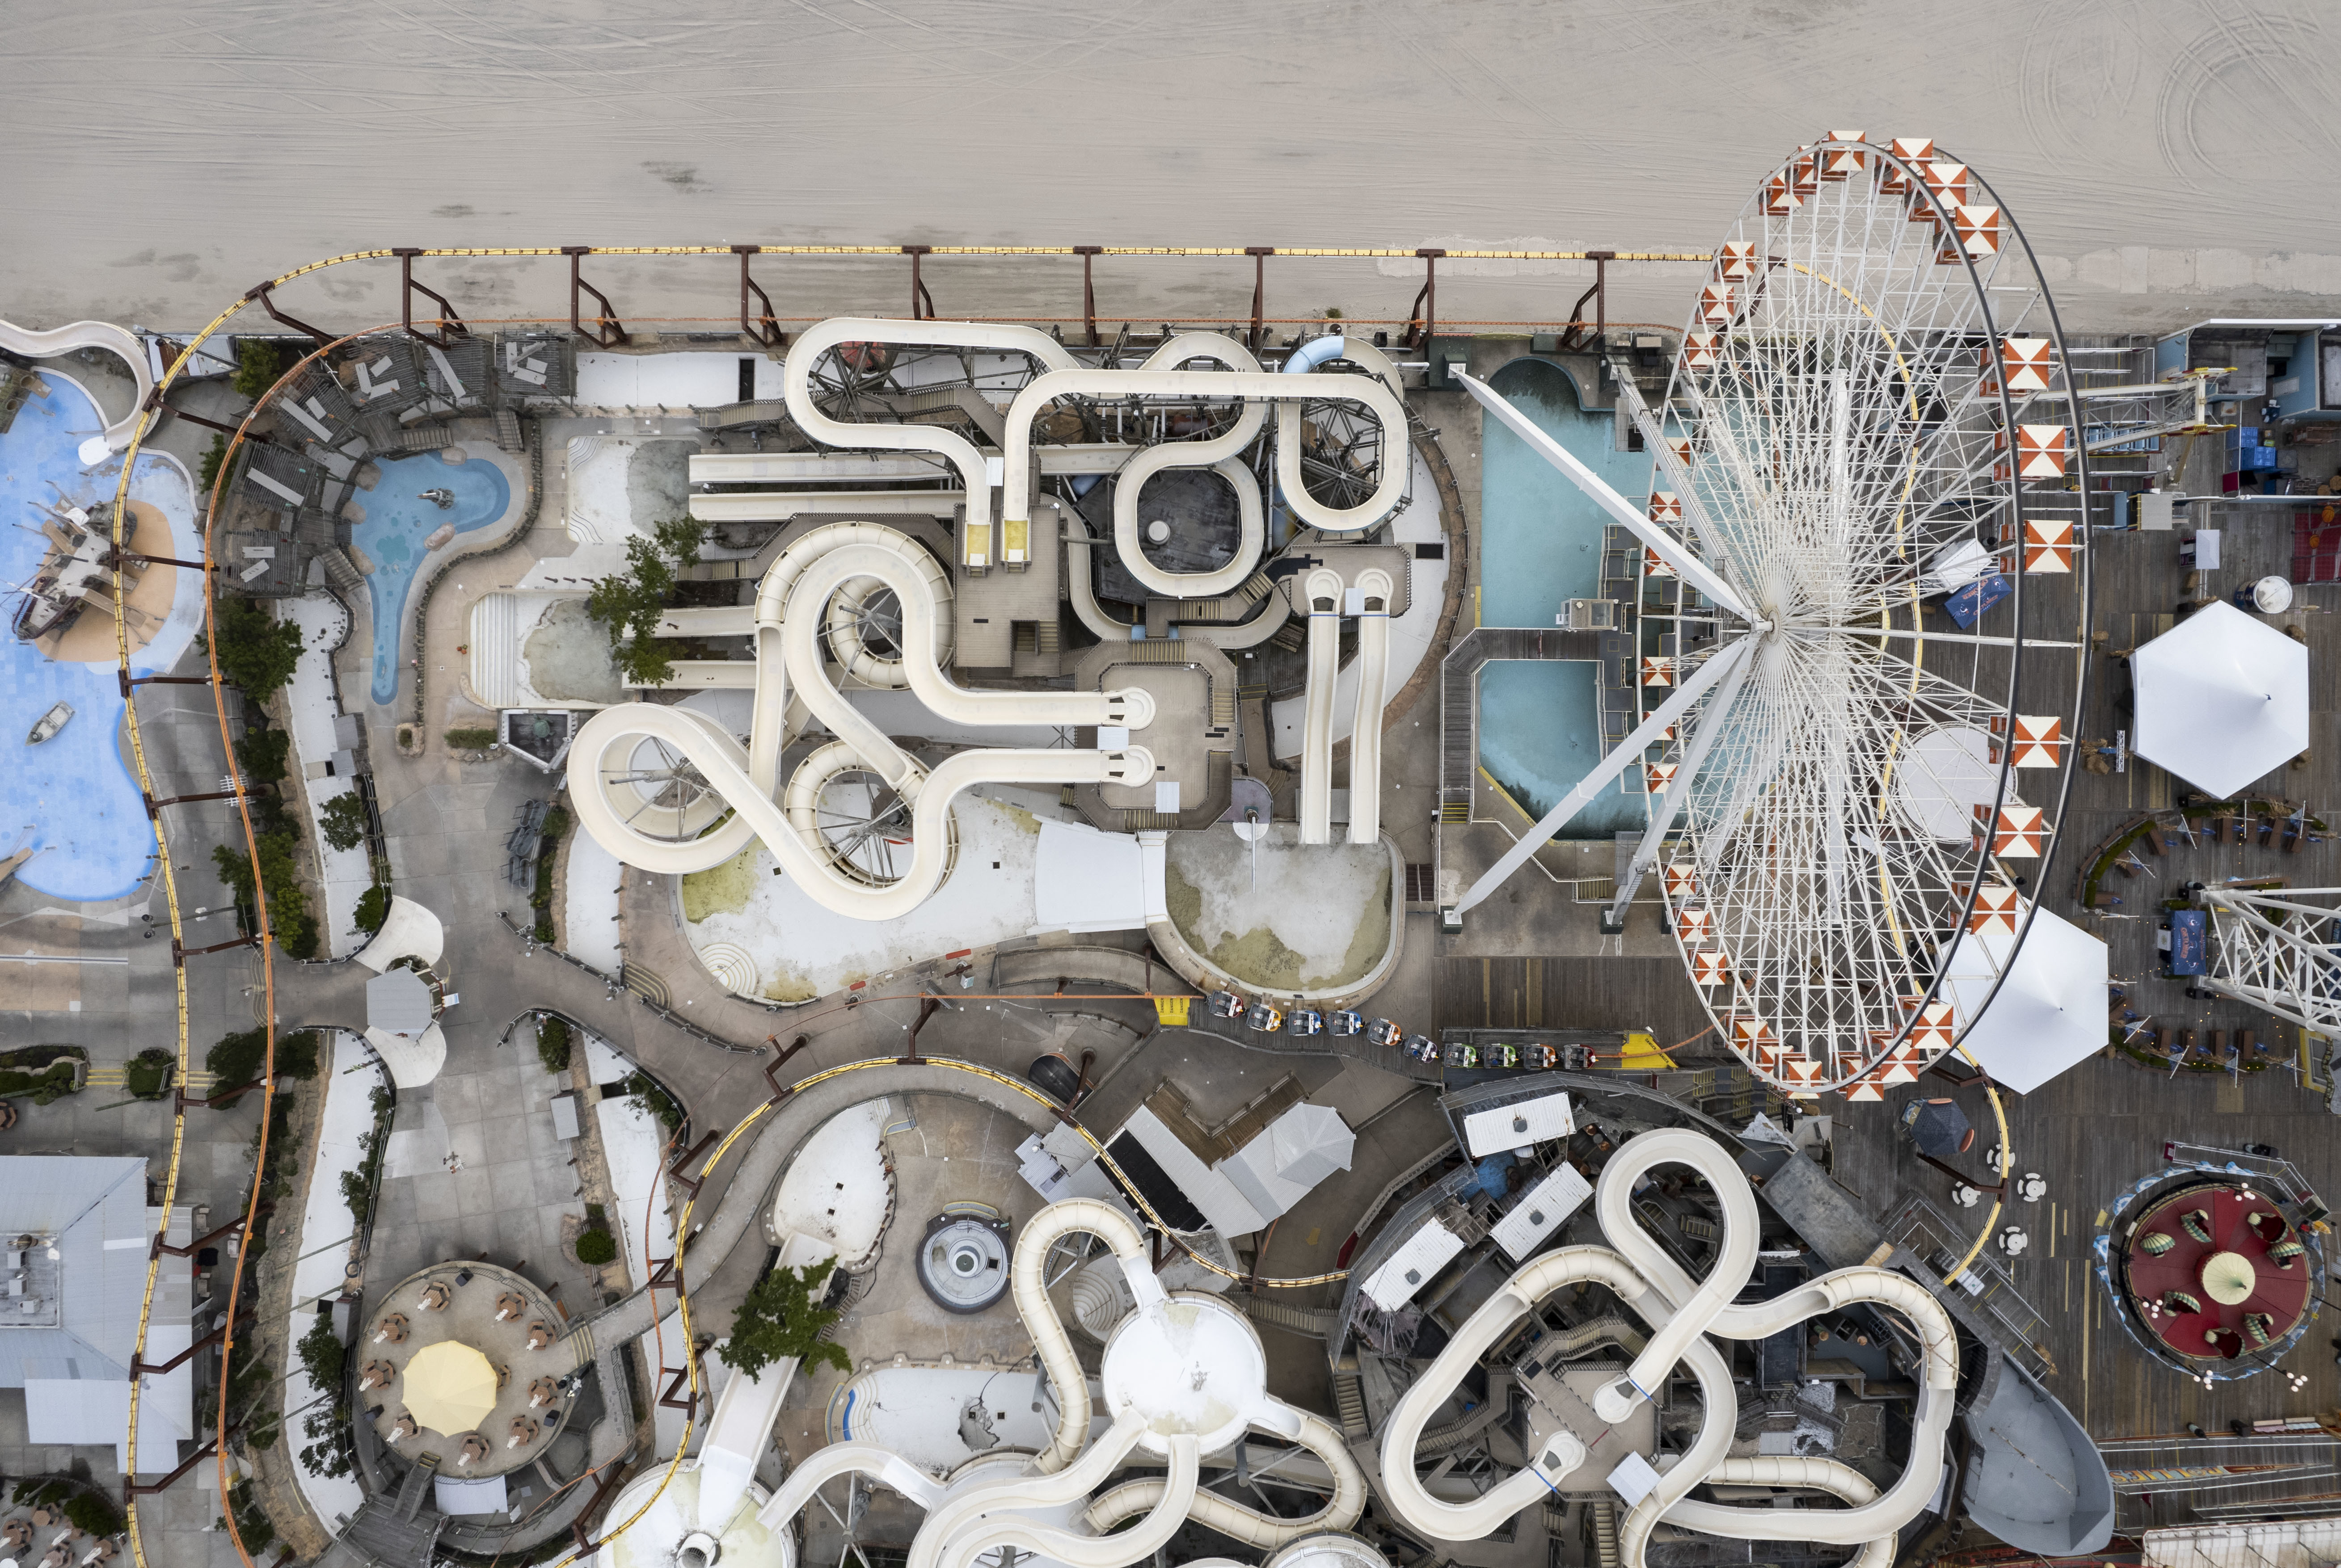 See a bird's-eye view of a Wildwood water park at season's end